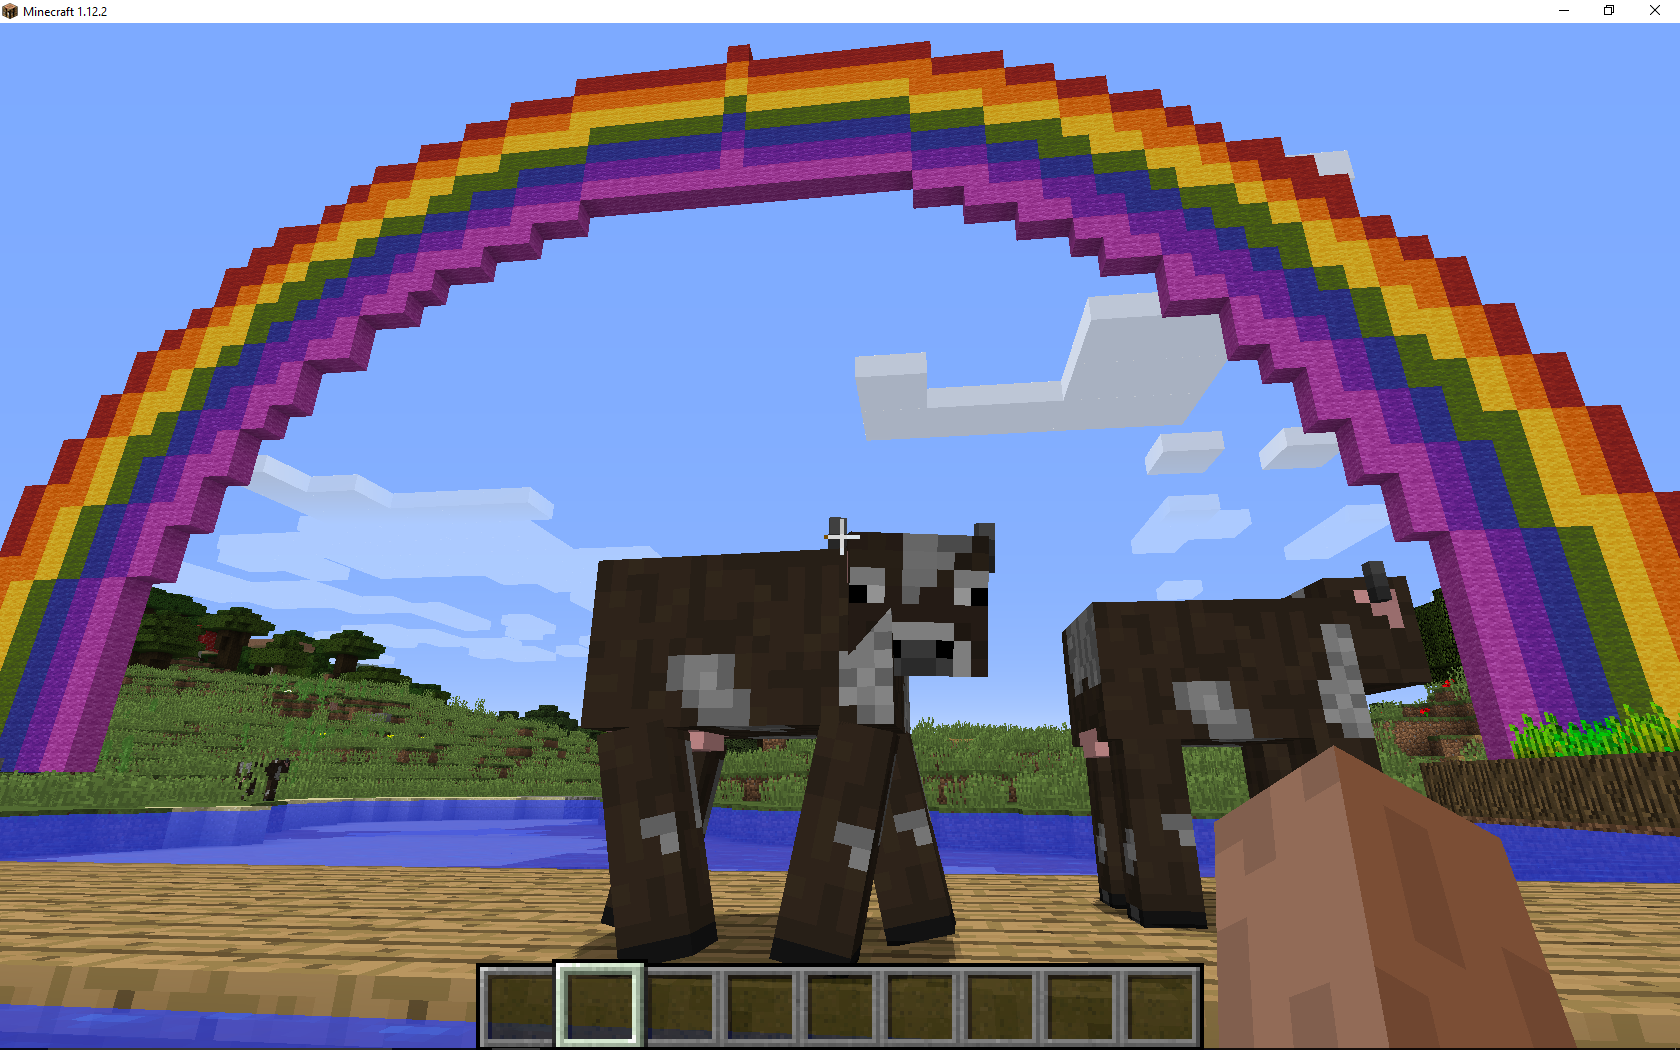 How to code a rainbow in MineCraft using Python